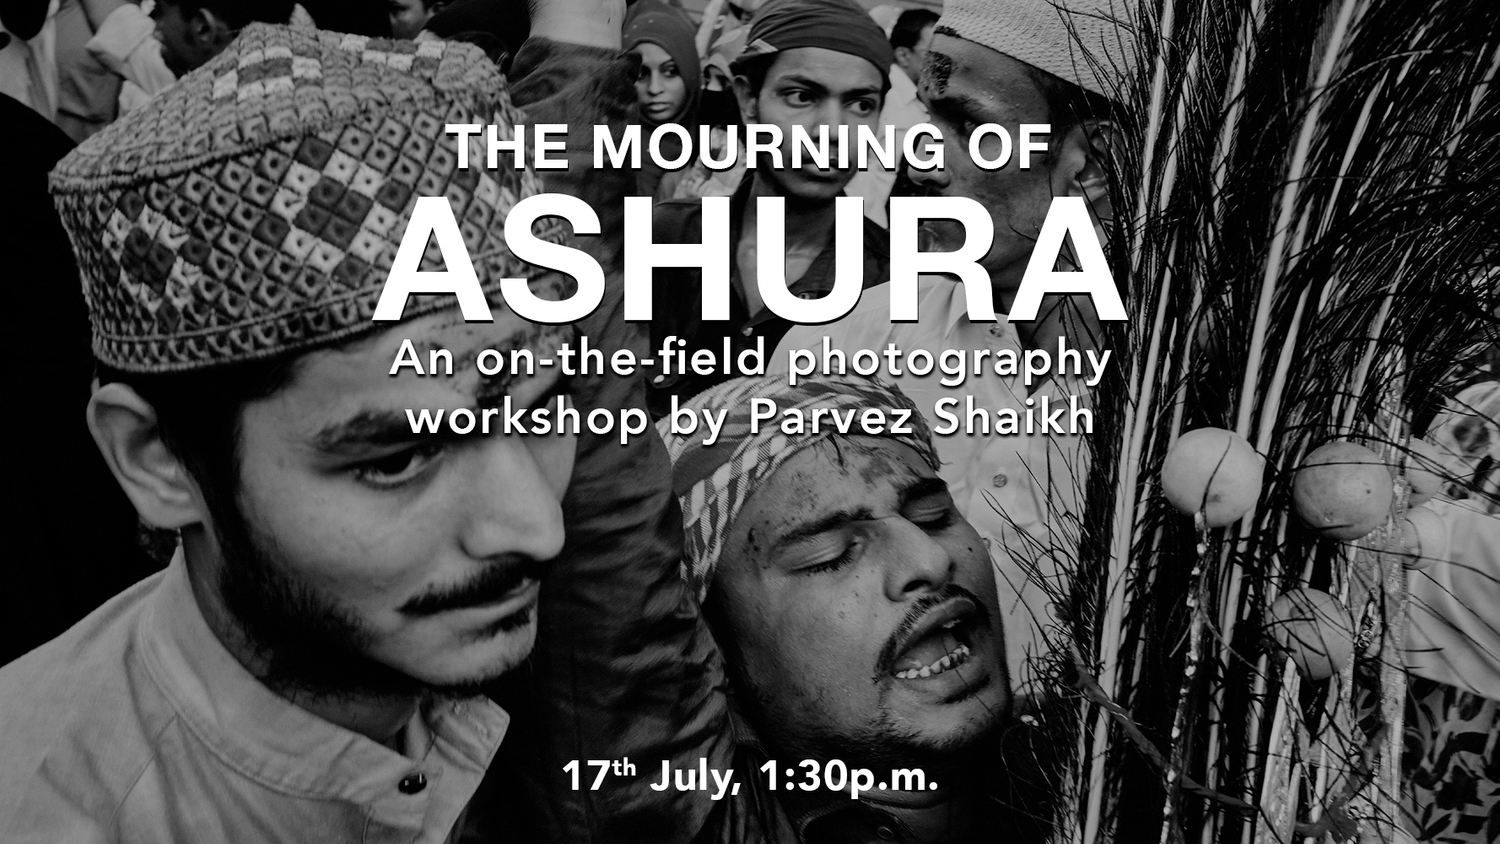 The Mourning of Ashura - A Photography Workshop in Ahmedabad